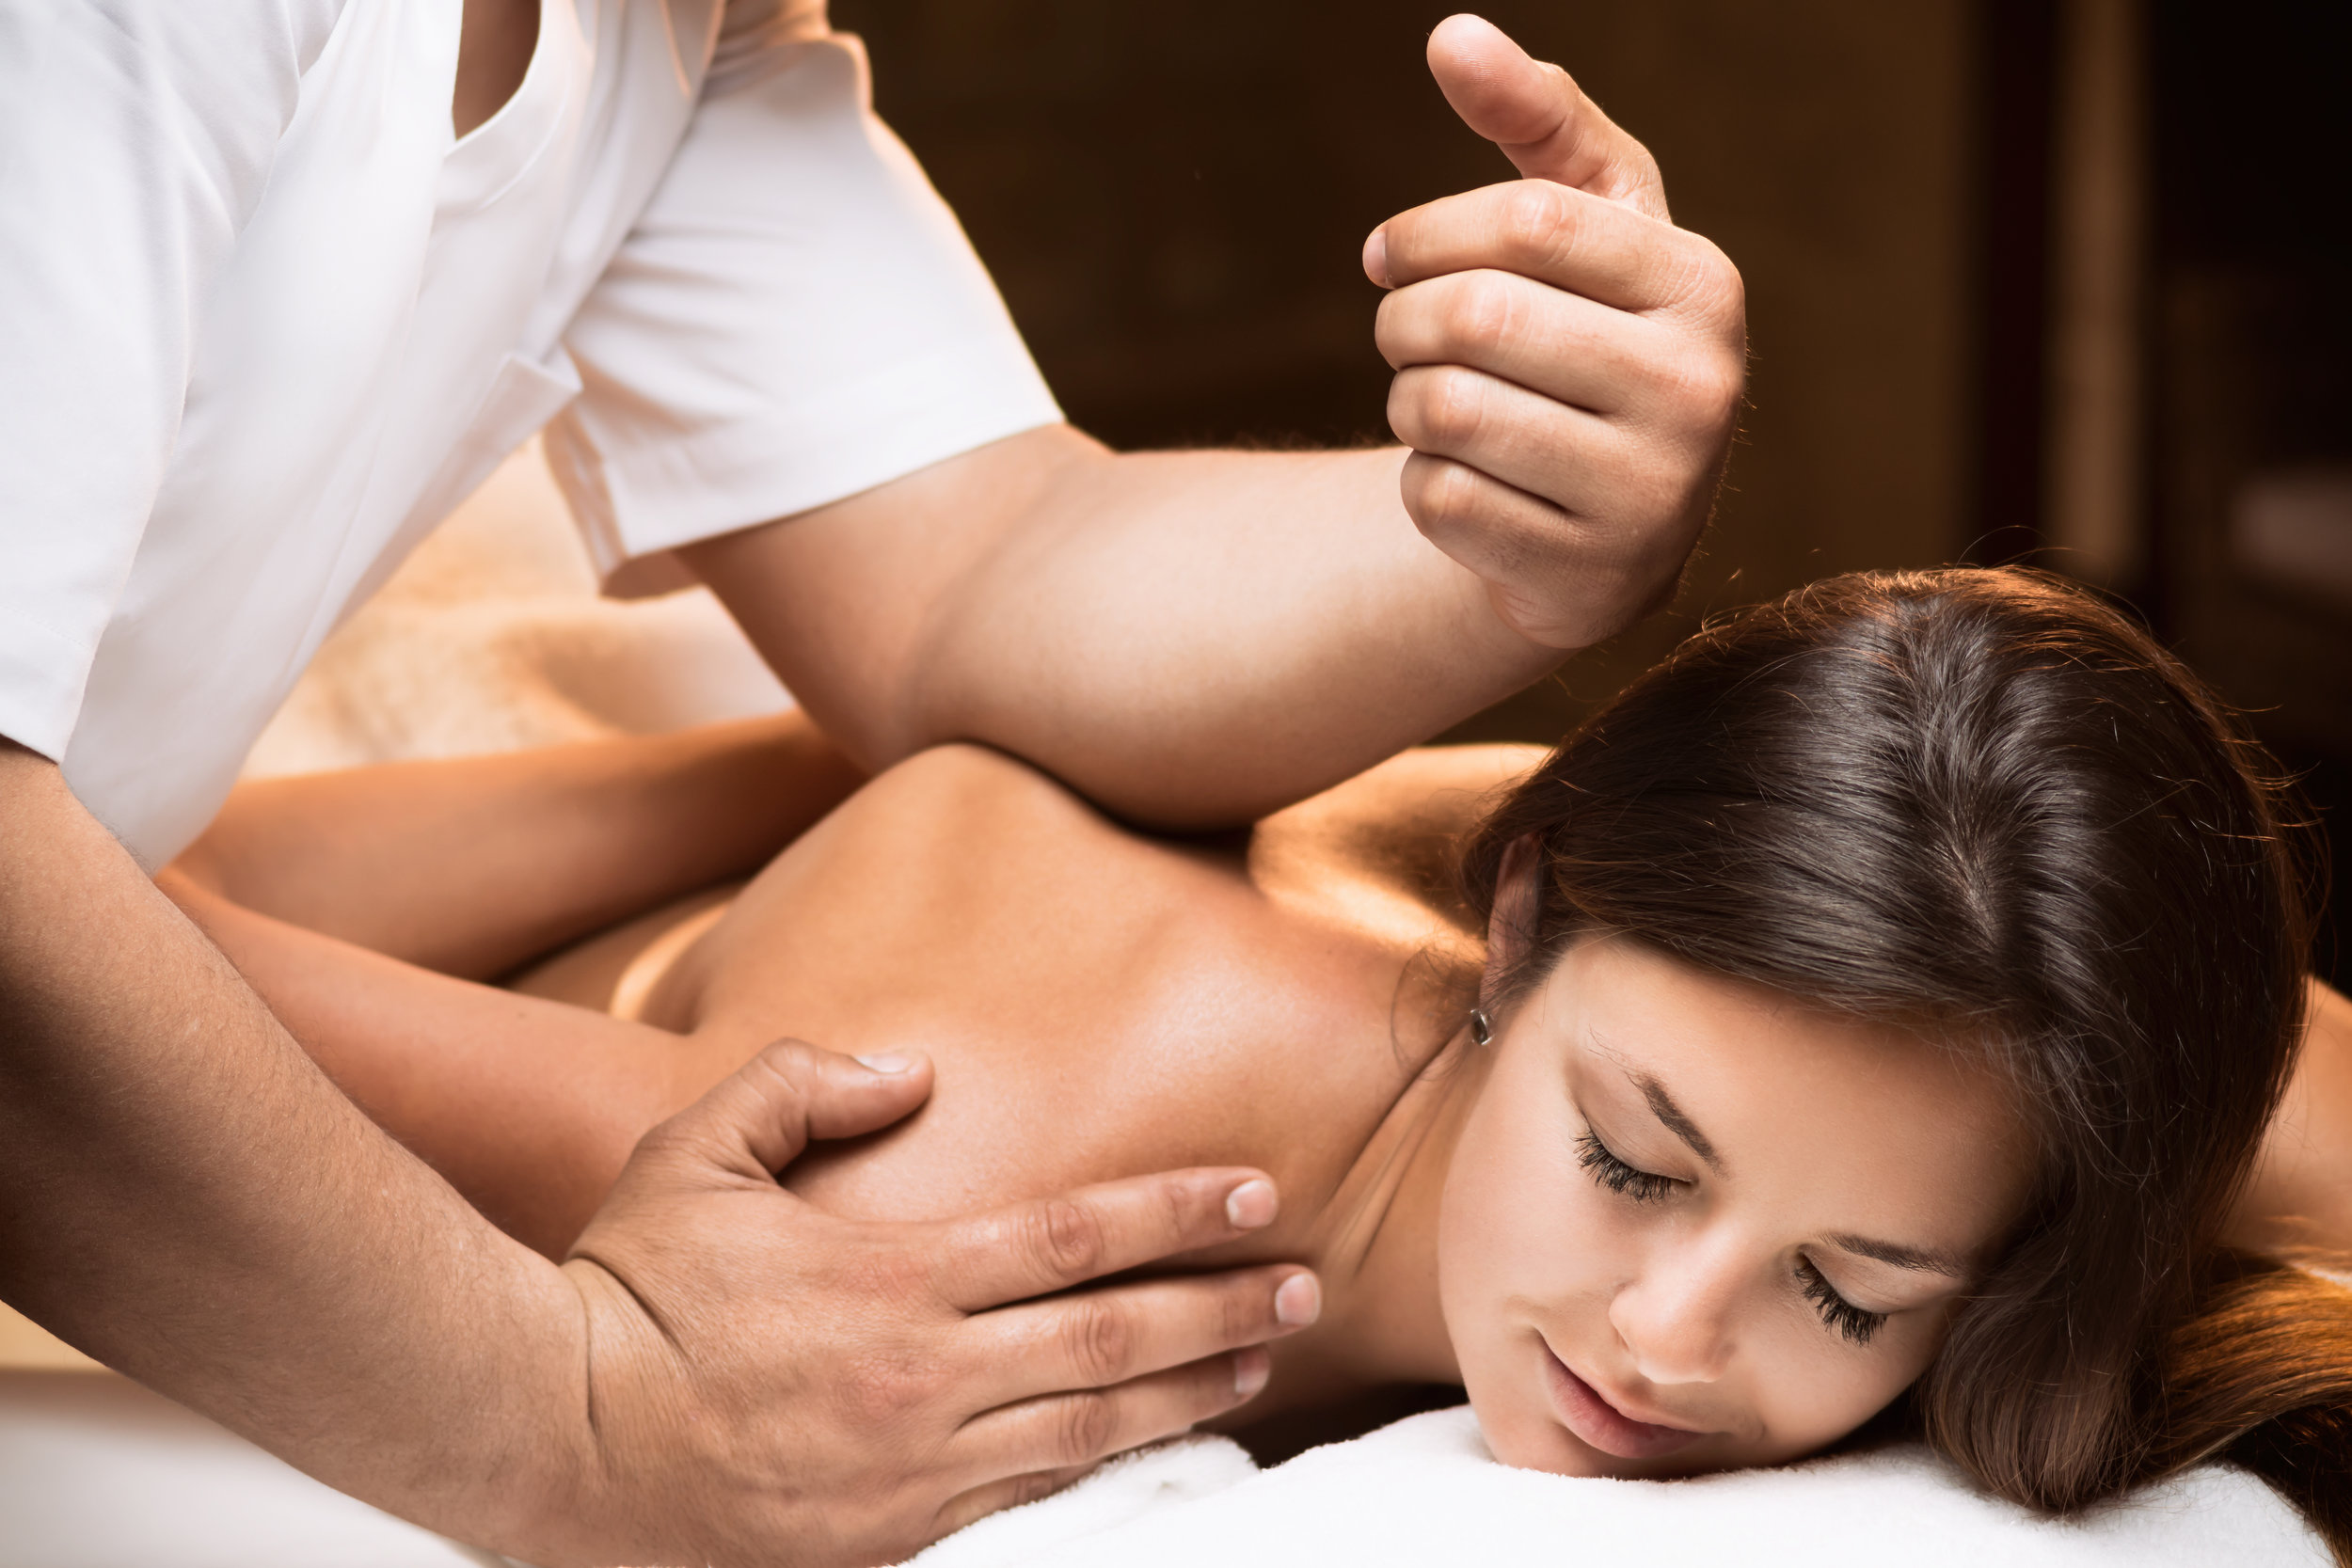 Are massages supposed to hurt?